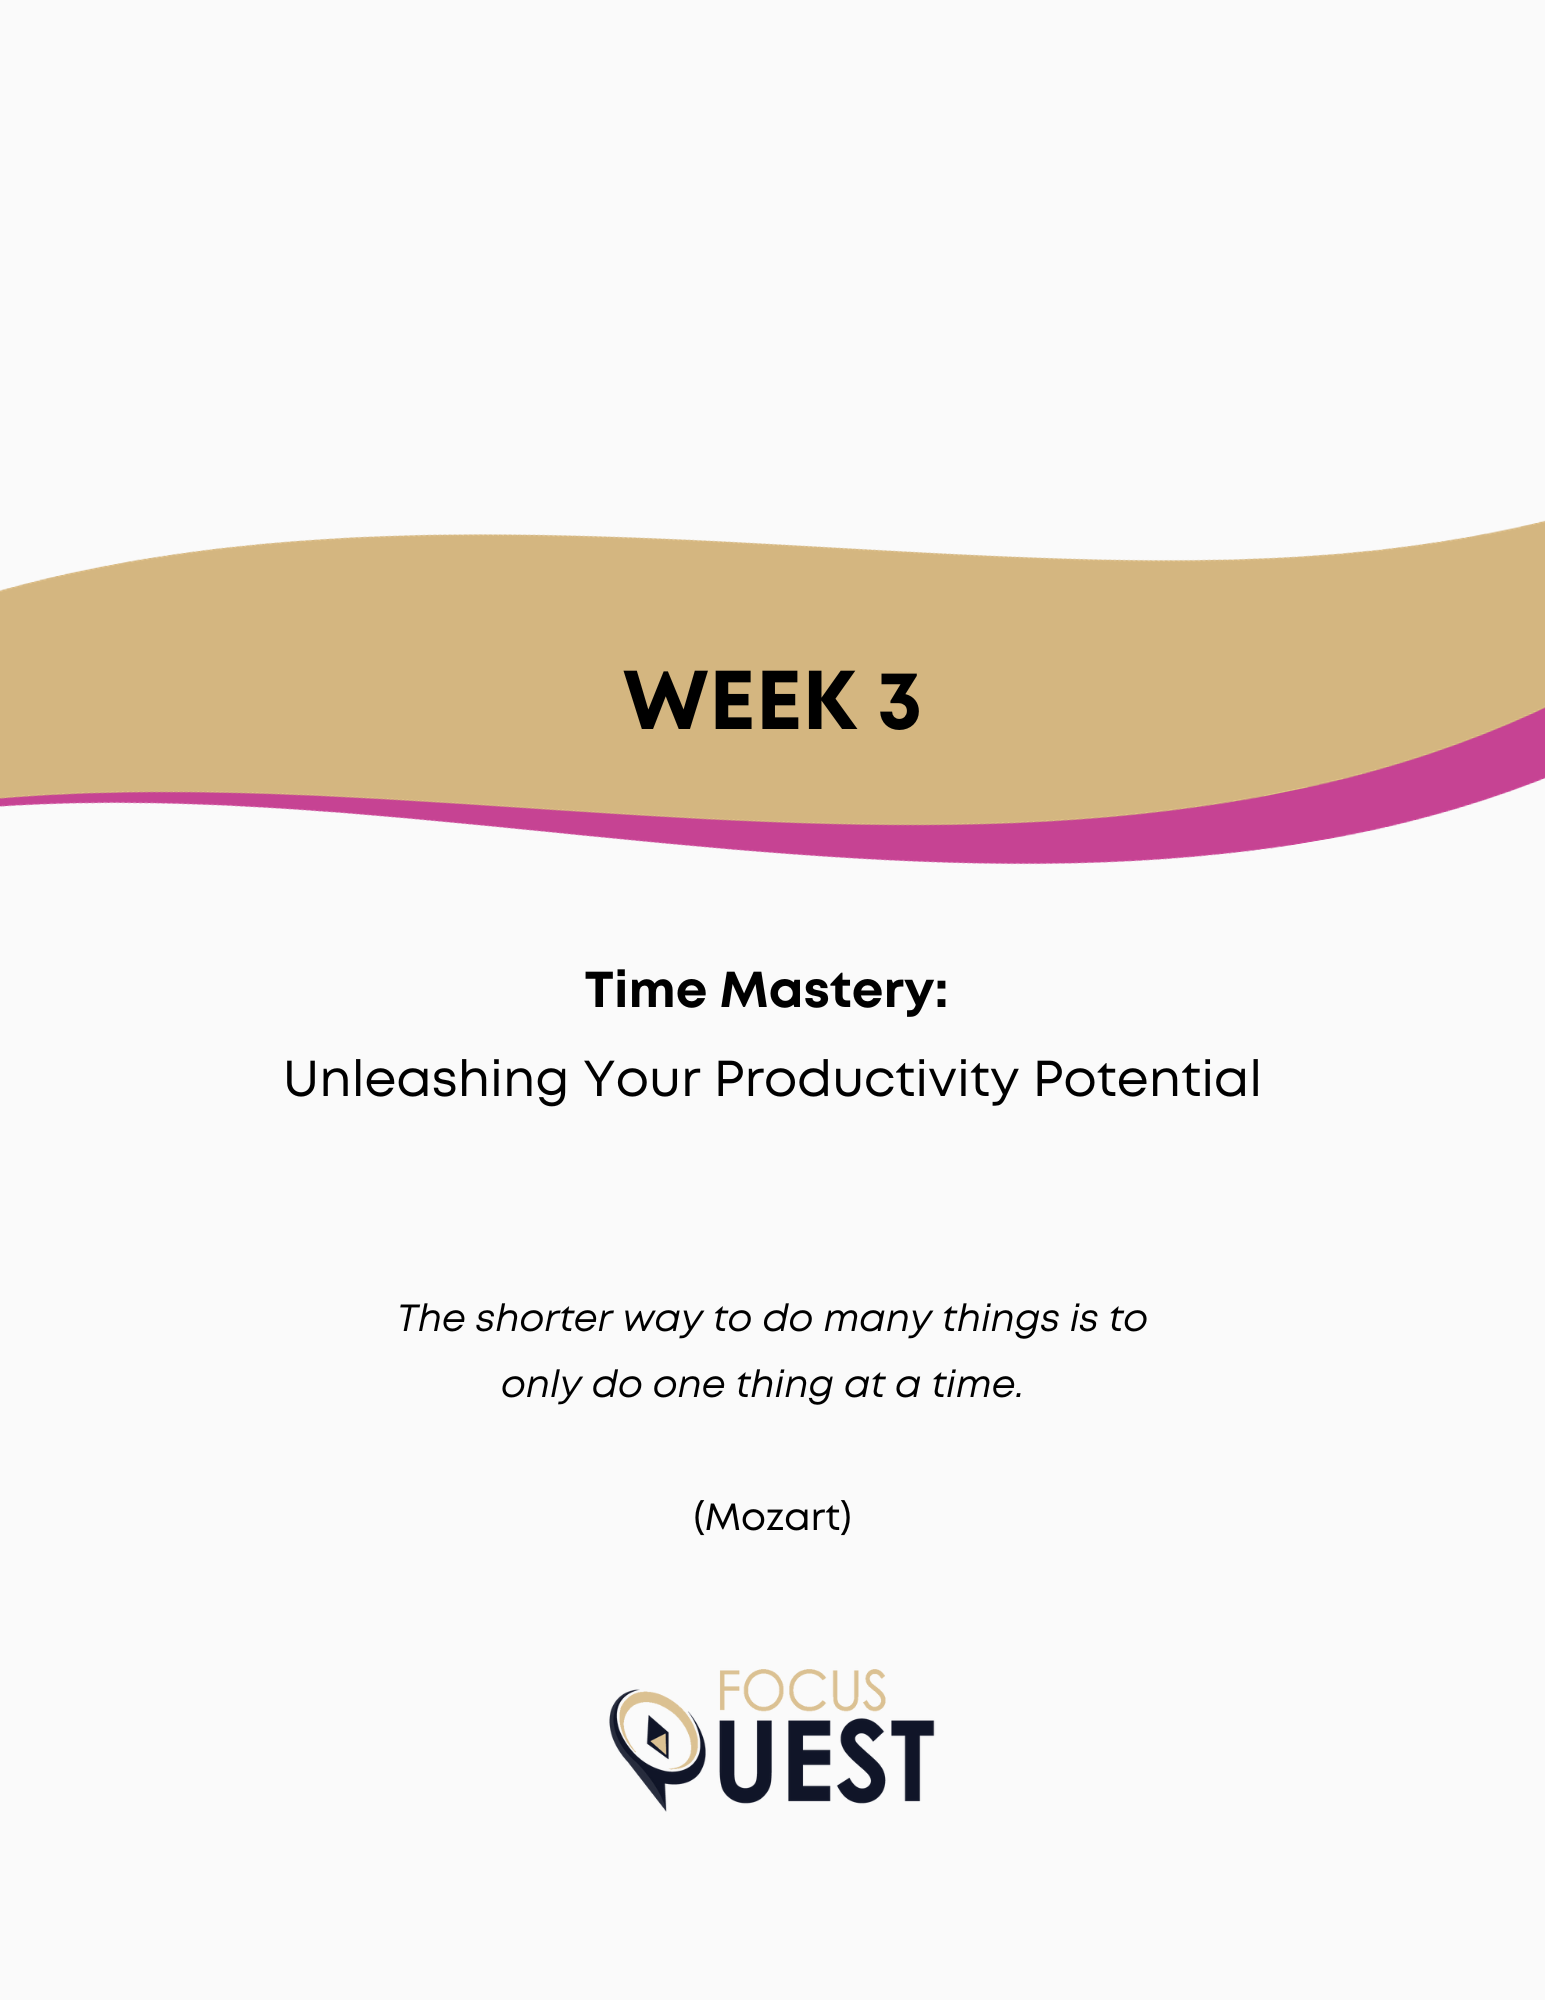 FocusQuest - Quest for Success Week 3 - Time Mastery: Unleashing Your Productivity Potential